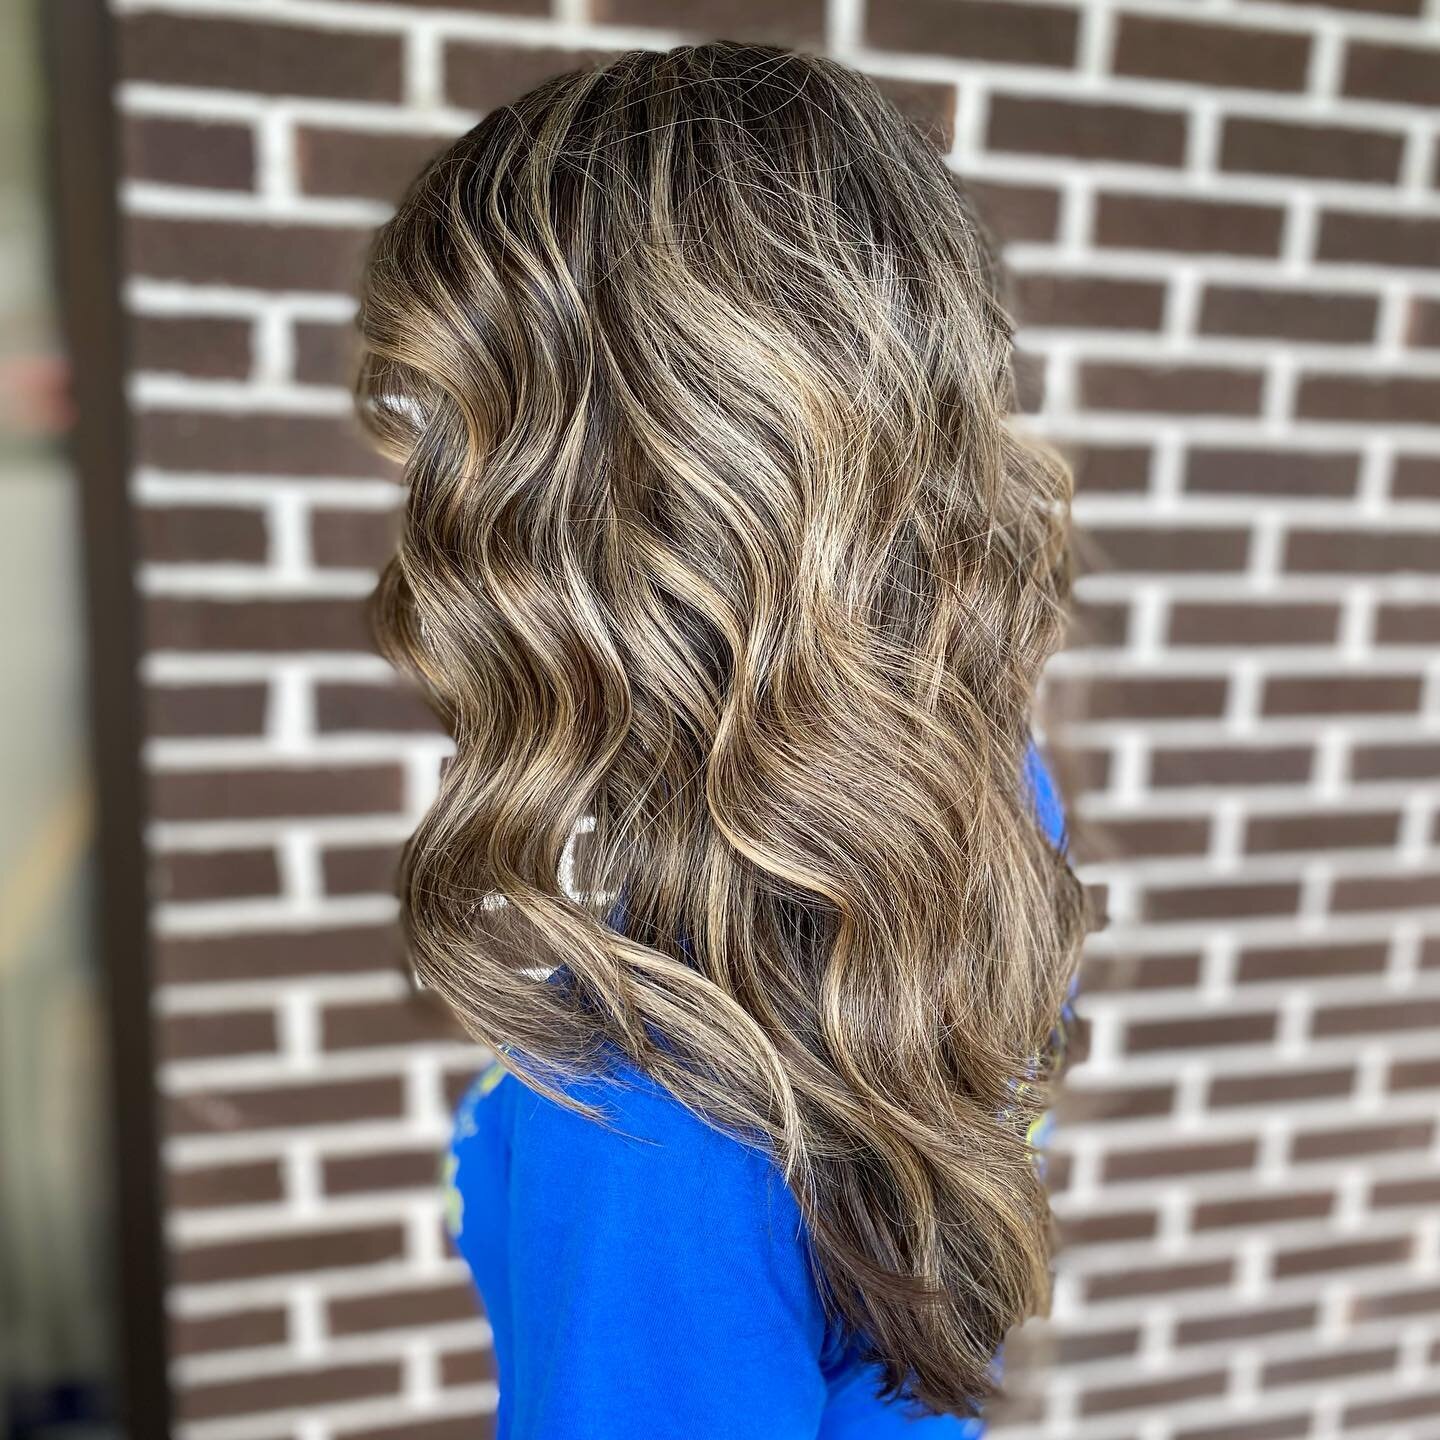 How can you have Monday Blues when your hair looks like this 💁🏼&zwj;♀️✨

Our stylist Sam delivered an amazing highlight for her client🤩

#highlights #brunettehighlight #blondehighlights #blonderthebetter #lehighvalleystylist #lehighvalleysalon #ha